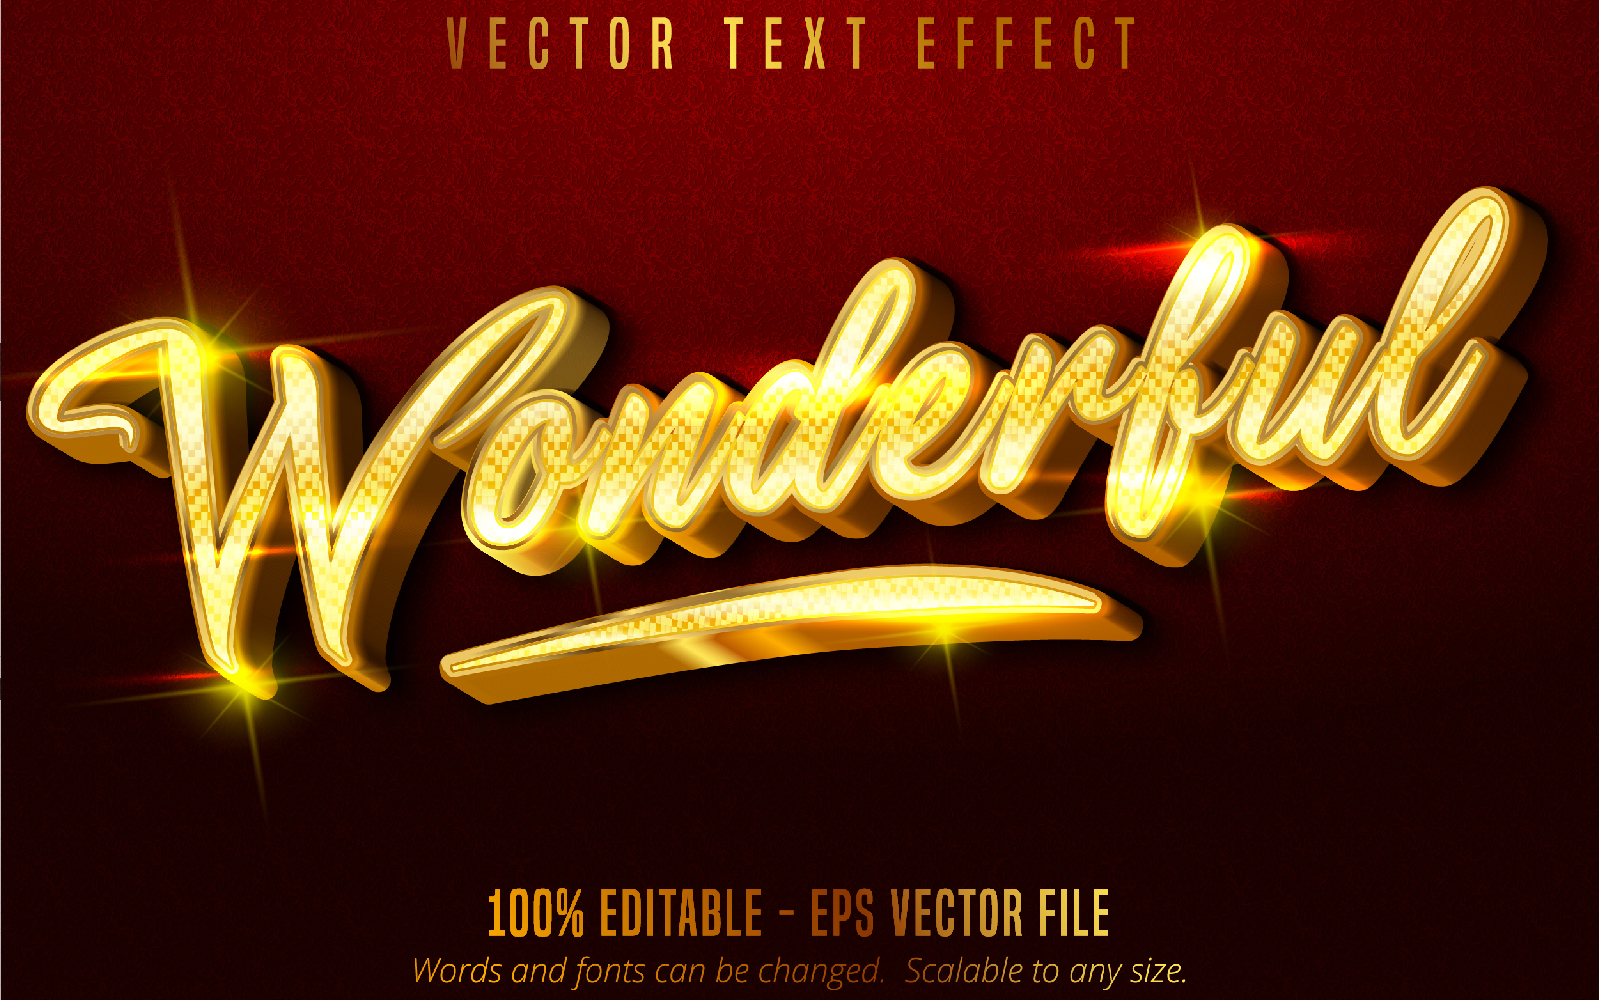 Wonderful - Editable Text Effect, Metallic And Glitter Gold Text Style, Graphics Illustration